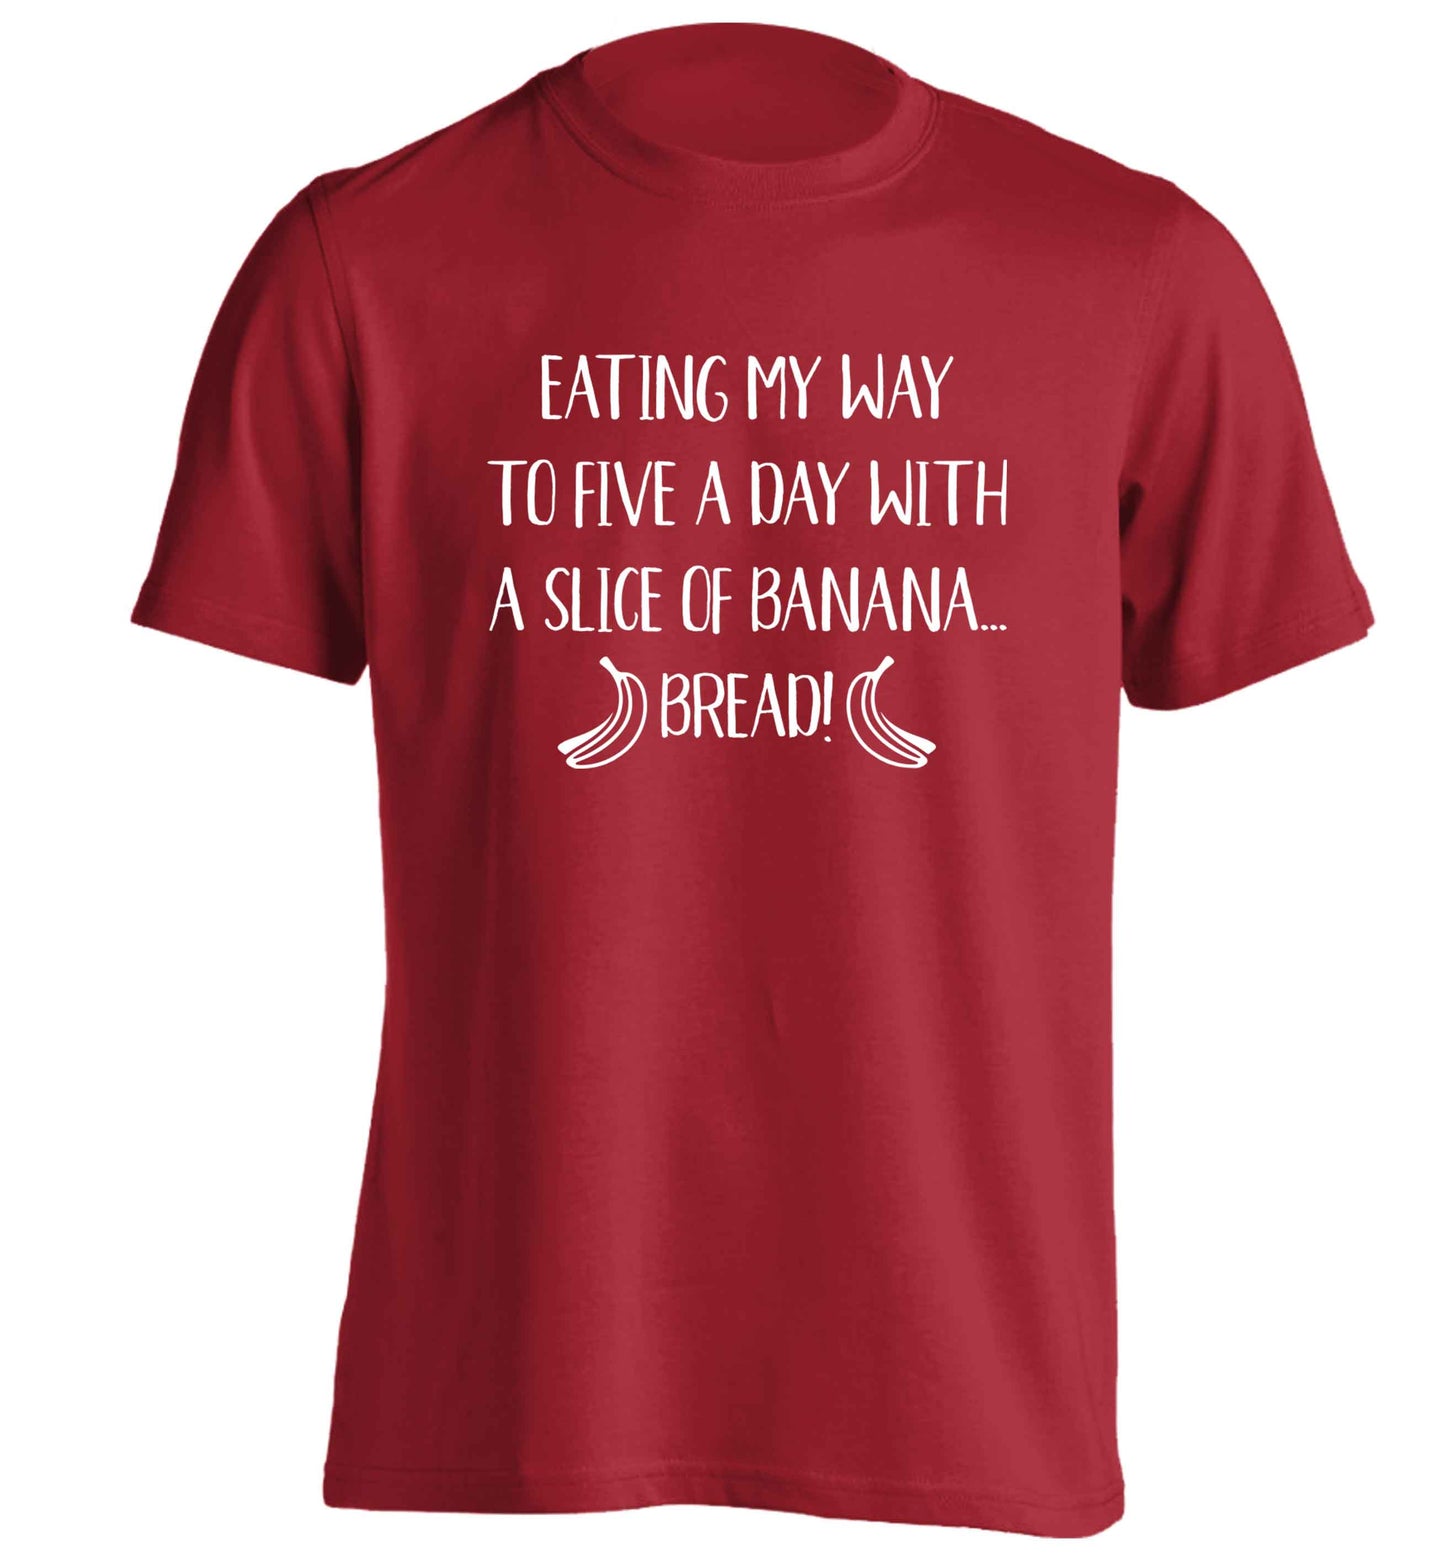 Eating my way to five a day with a slice of banana bread adults unisex red Tshirt 2XL